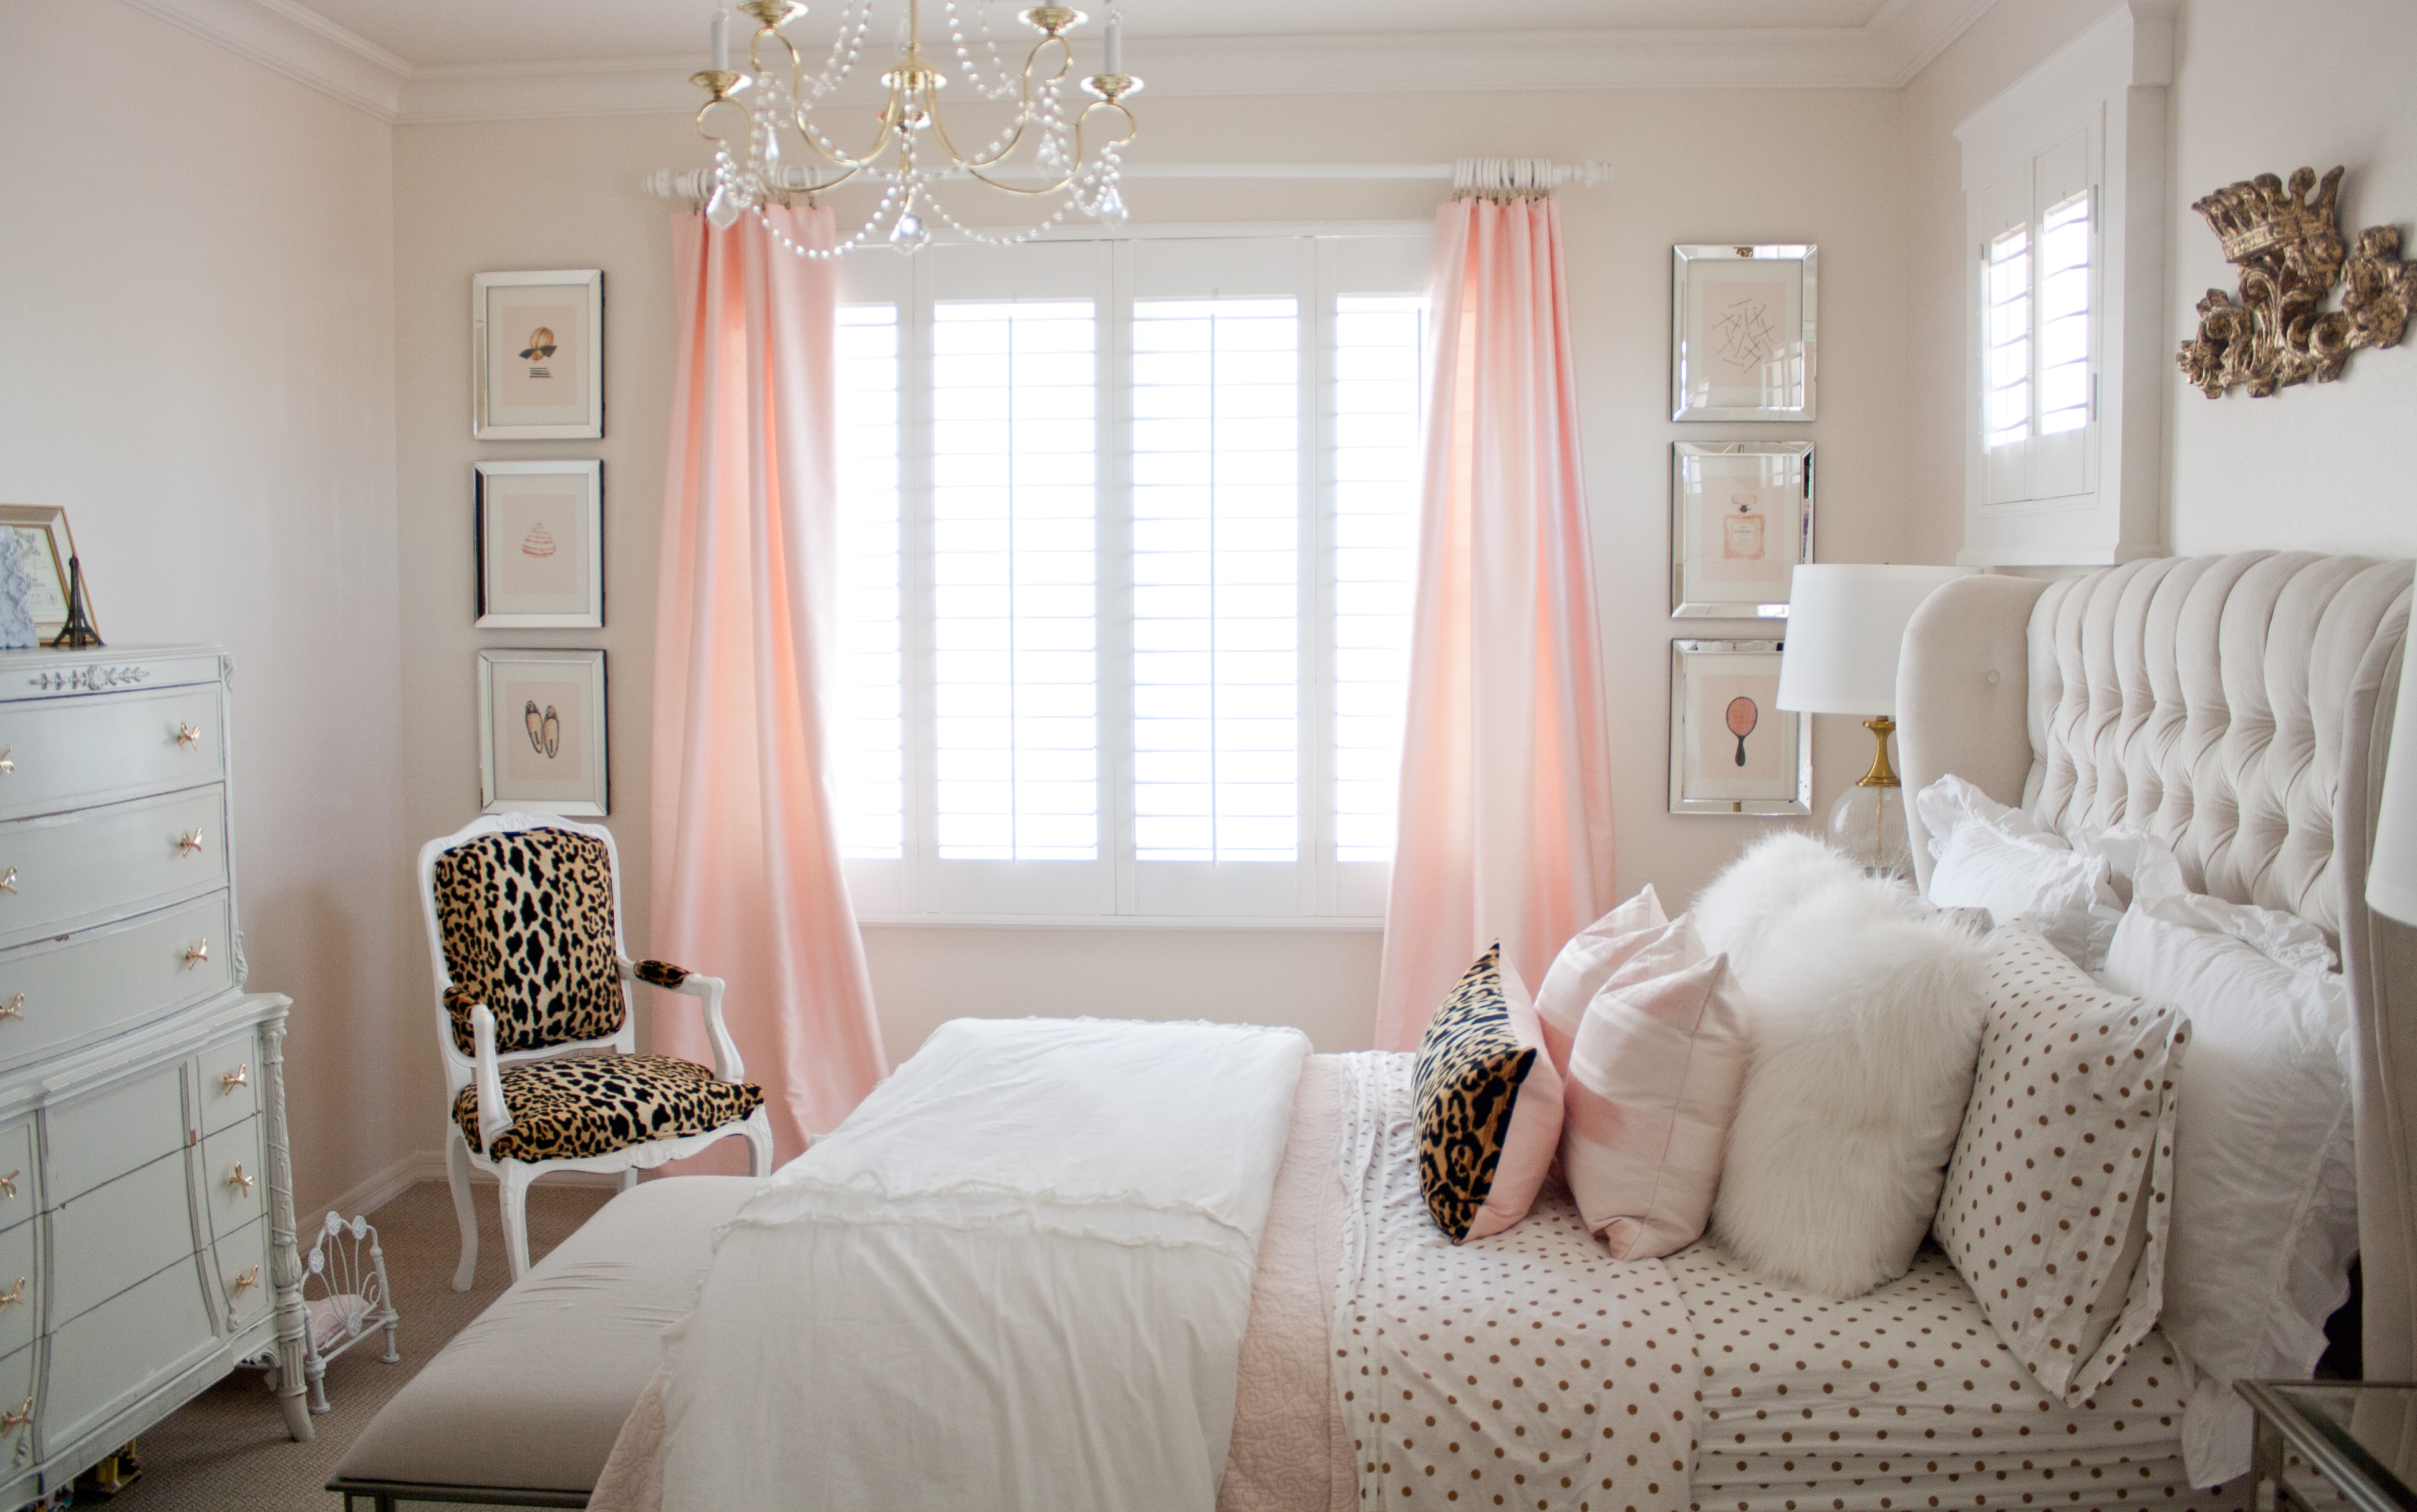 Pink and gold bedroom by Randi Garrett Design, using PB Teen gold polka dot sheets, RH Baby and Child crown wall plaque and leopard chair 